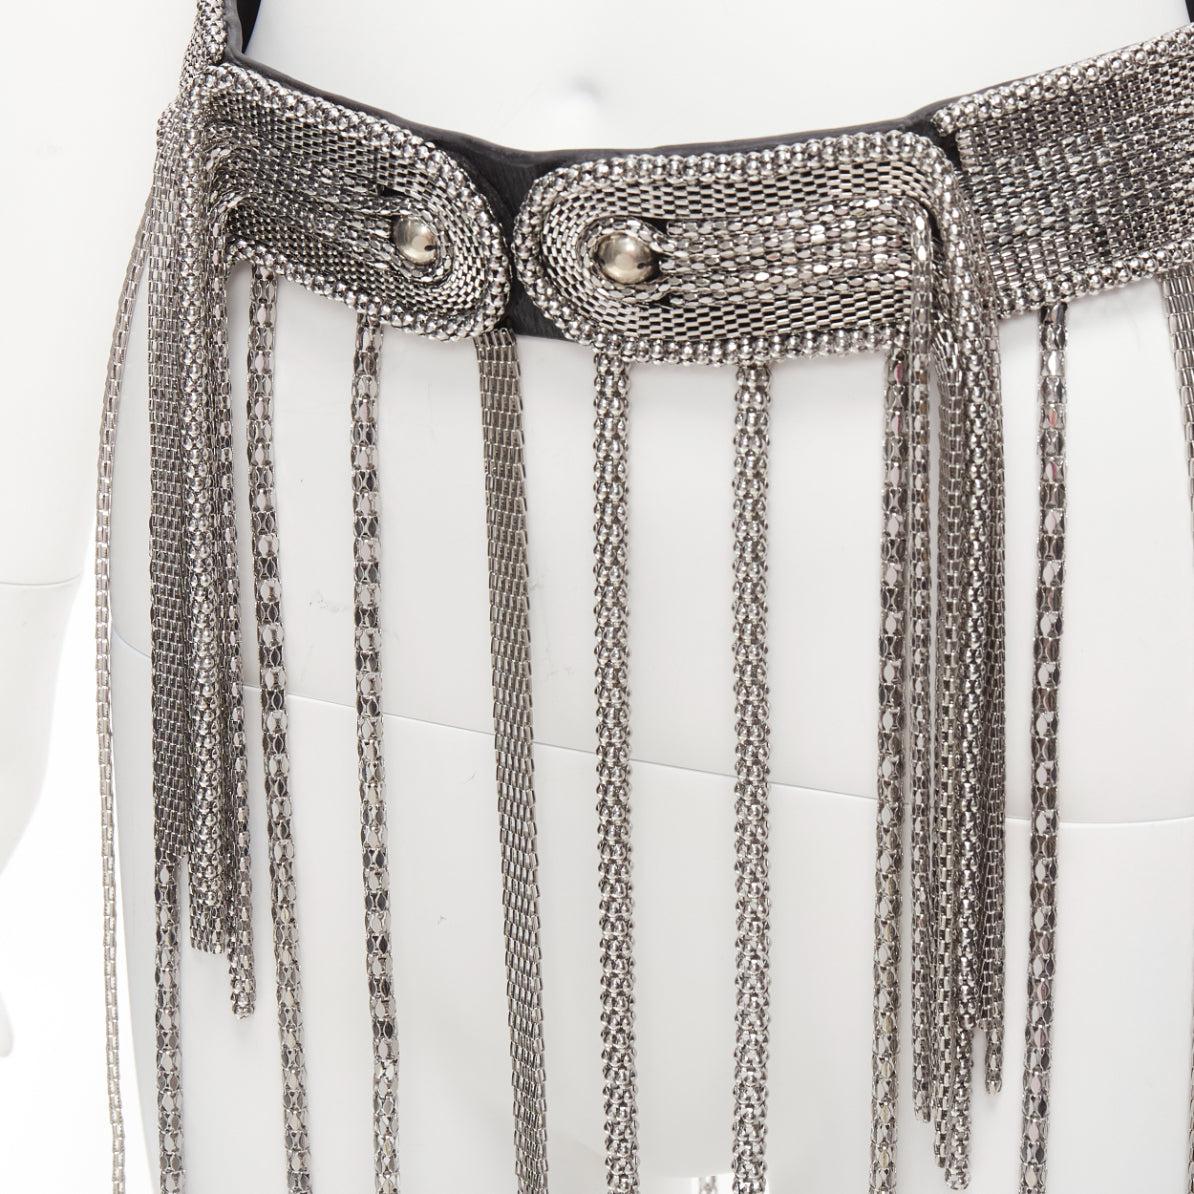 CHRISTOPHER KANE silver multi chain stud front black leather fringe belt S
Reference: AAWC/A01209
Brand: Christopher Kane
Material: Leather, Metal
Color: Black, Silver
Pattern: Solid
Closure: Snap Buttons
Lining: Black Leather
Extra Details: